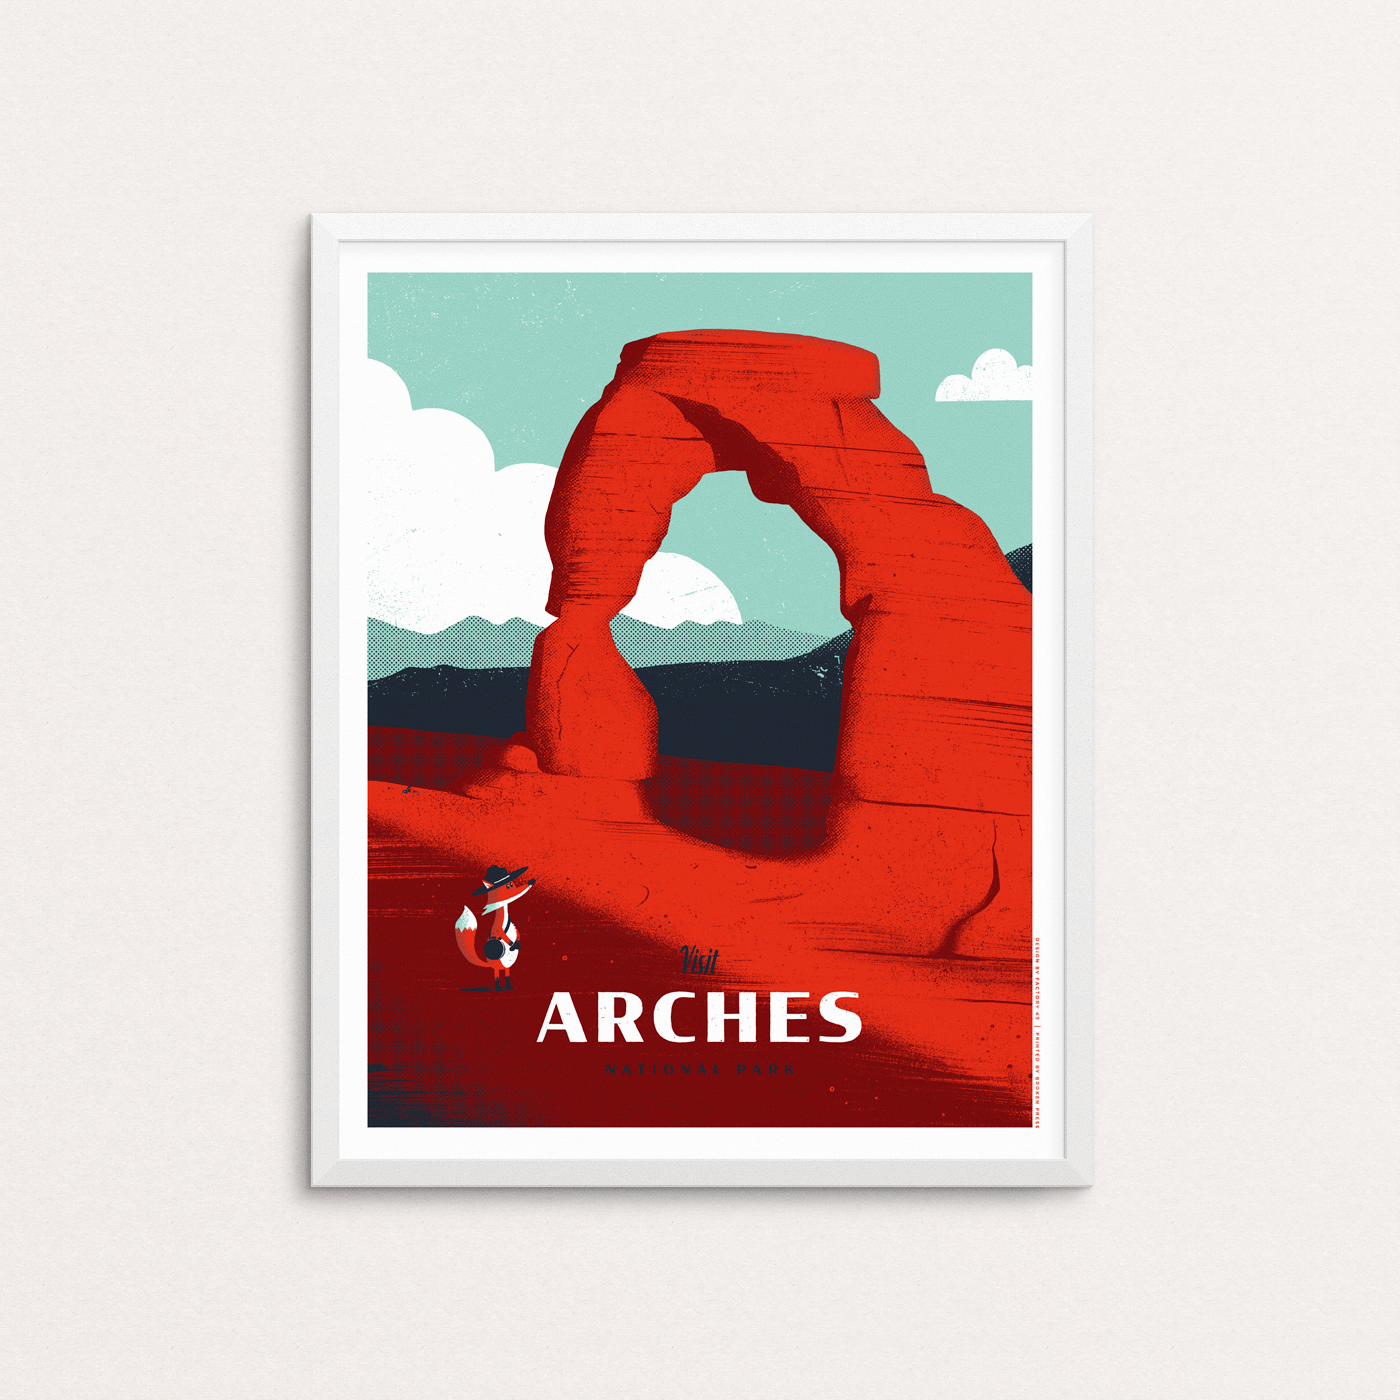 Arches National Park poster featuring a fox with a hat and canteen admiring red rocks of Delicate Arch in Utah. The print is show in a white frame.